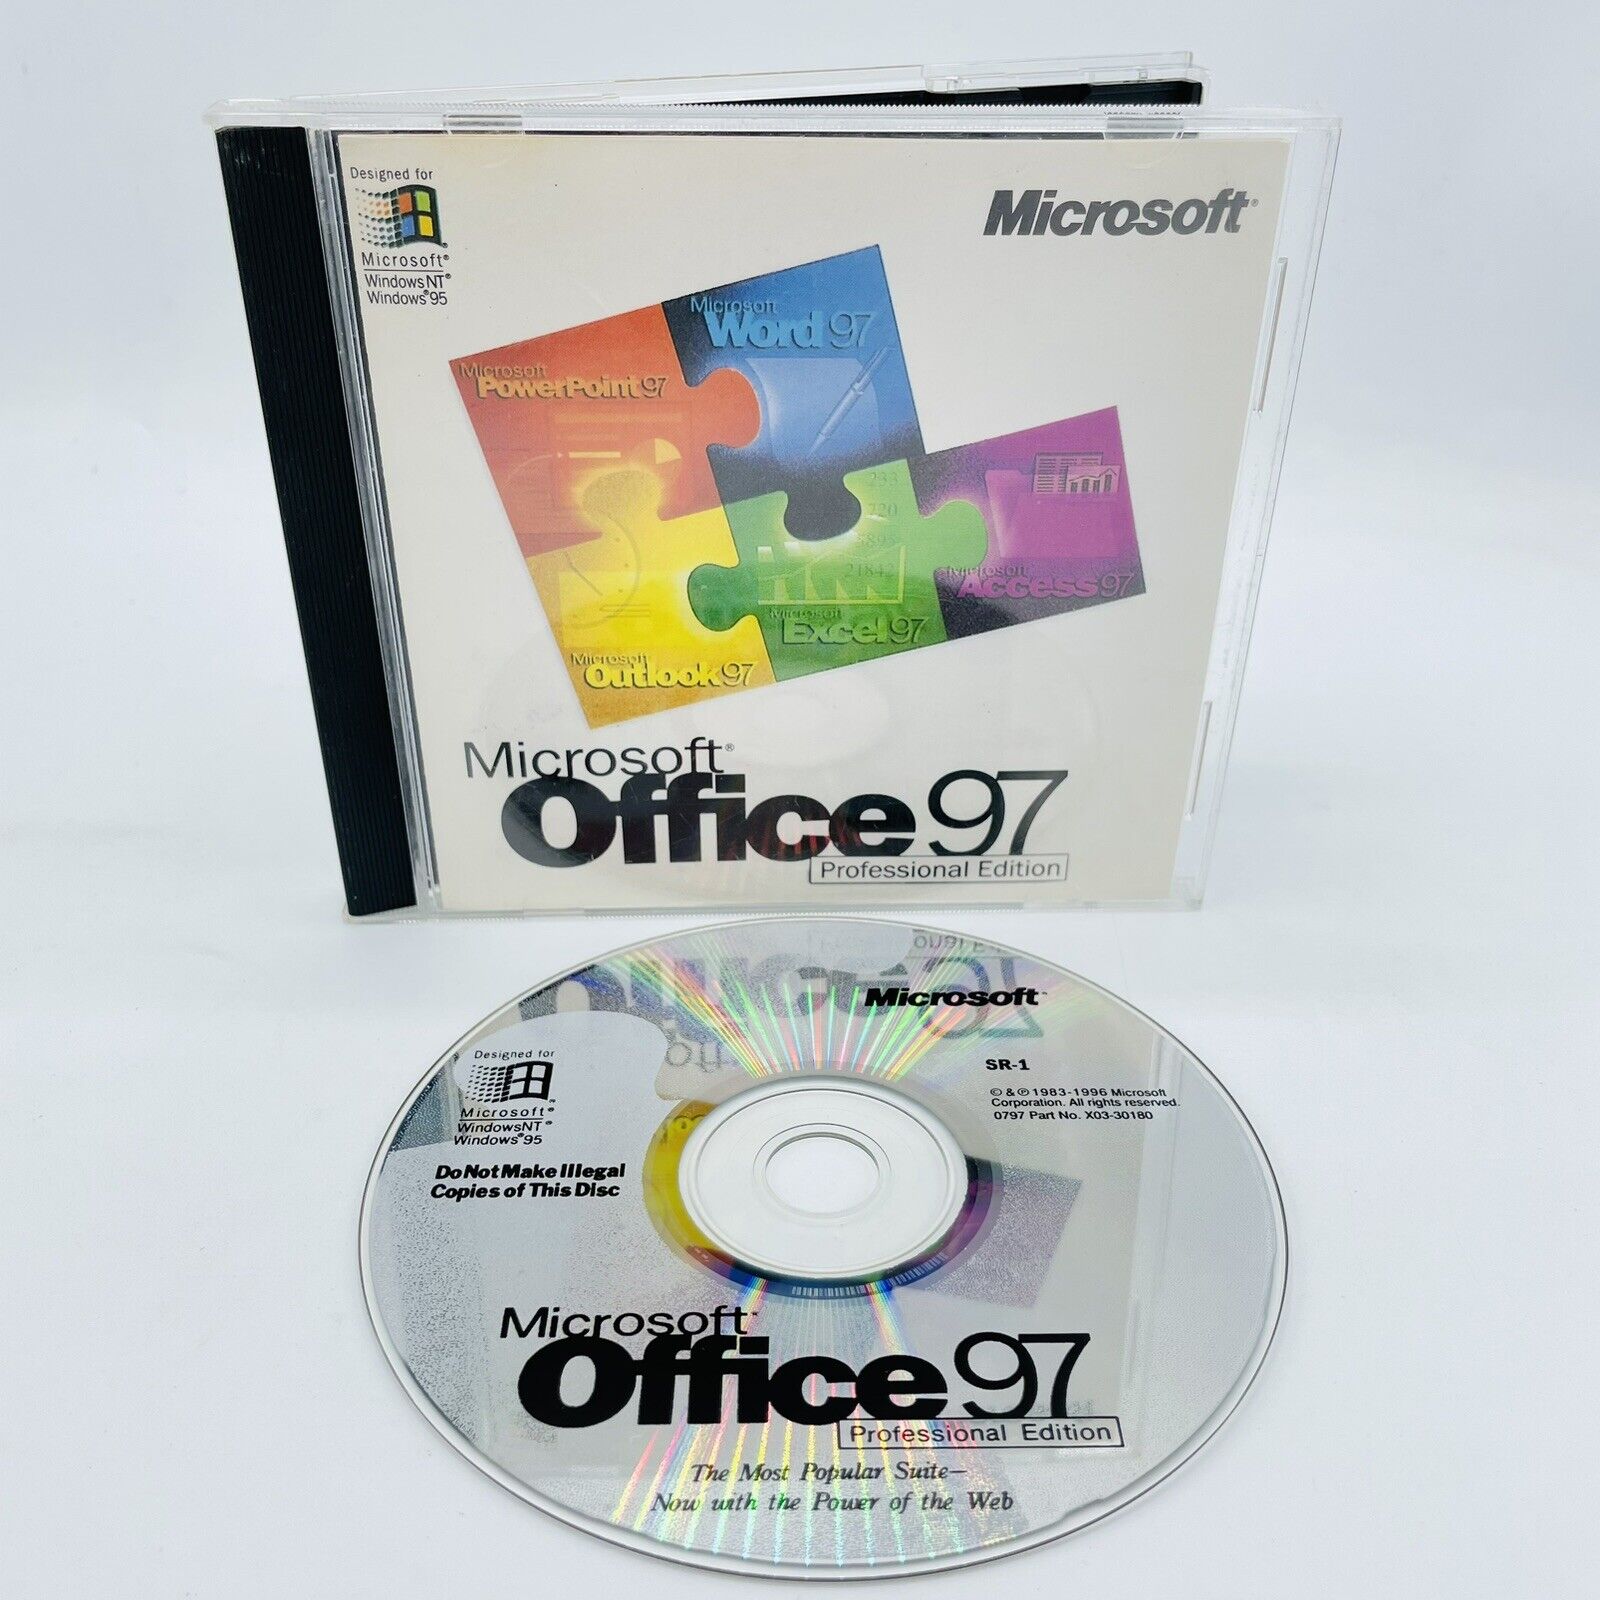 Microsoft Office 97 Professional Edition with CD Key, Windows 95 NT, TESTED